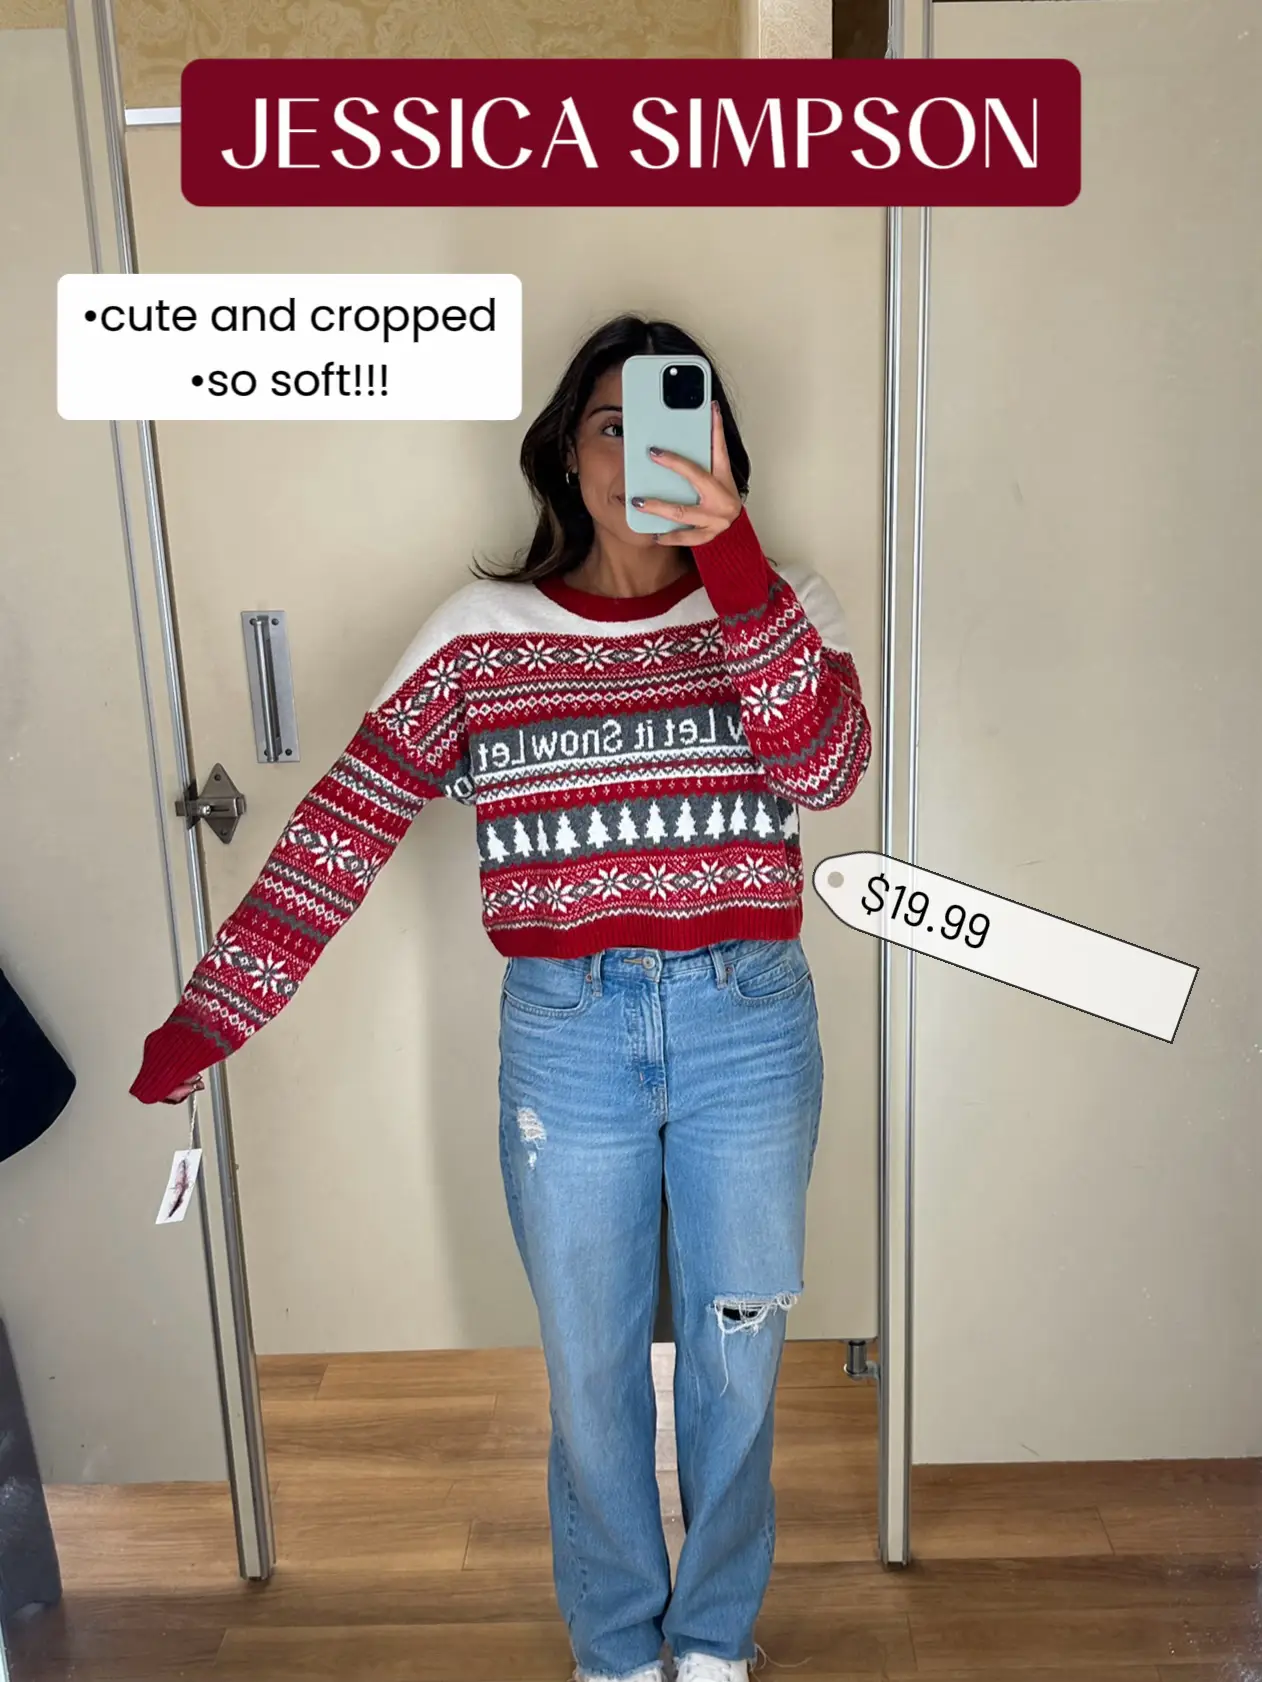  A woman in a red and white sweater is taking a selfie in a mirror.